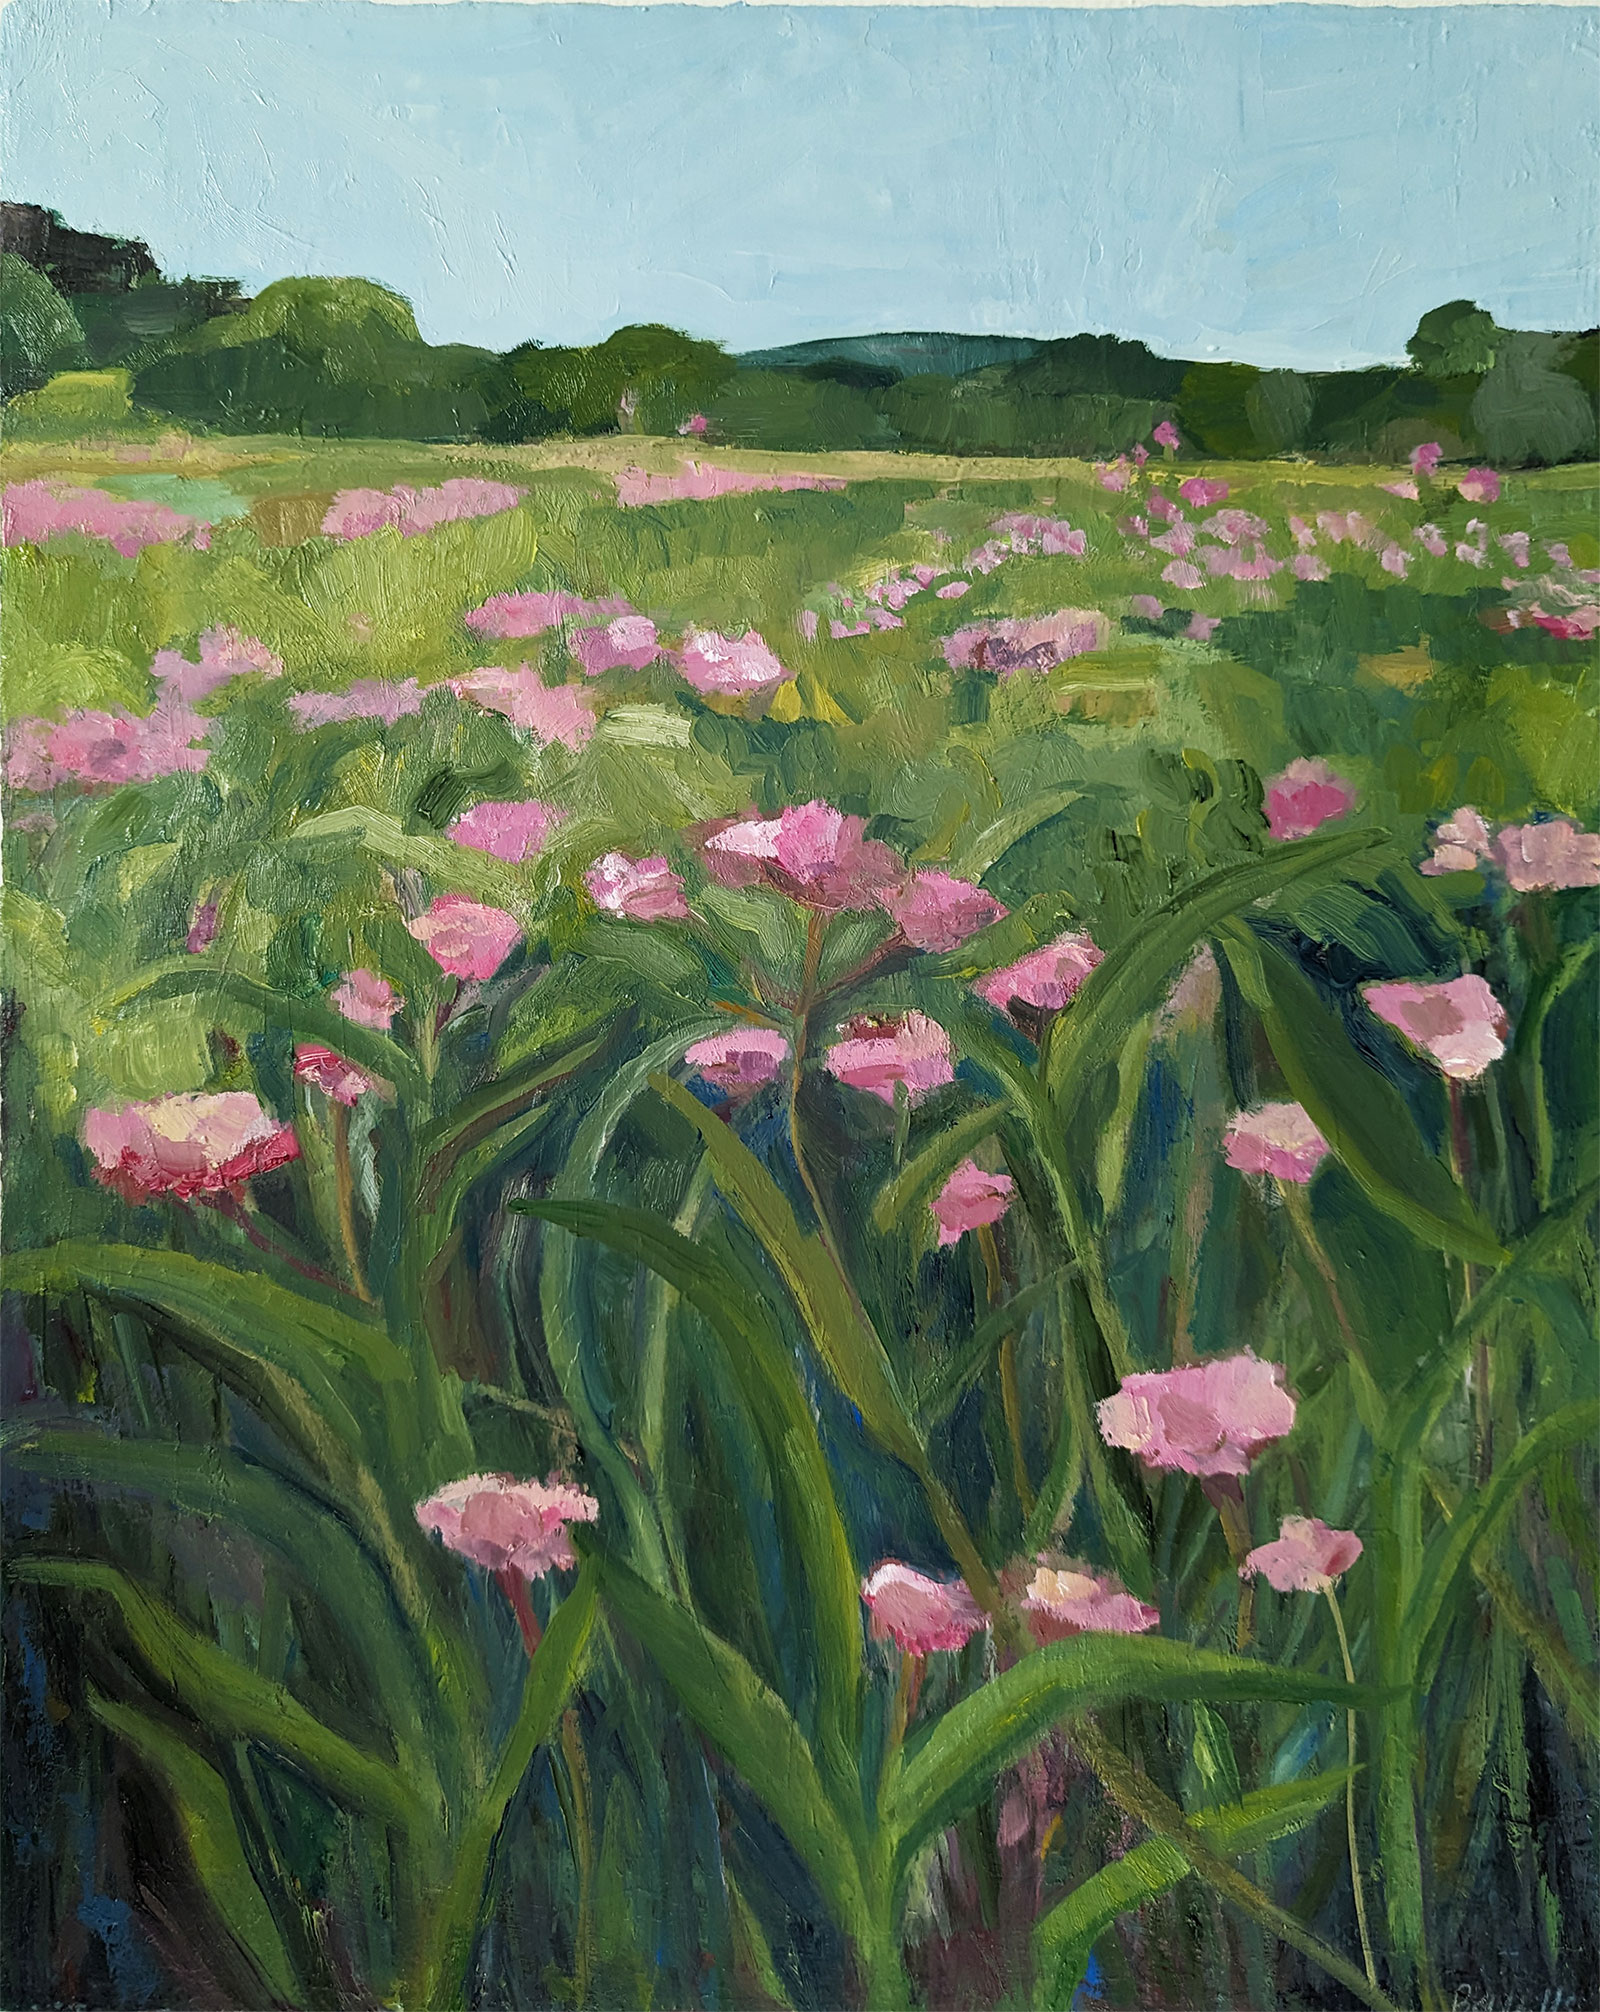 In the Meadow is an oil painting by Bridgette Guerzon Mills